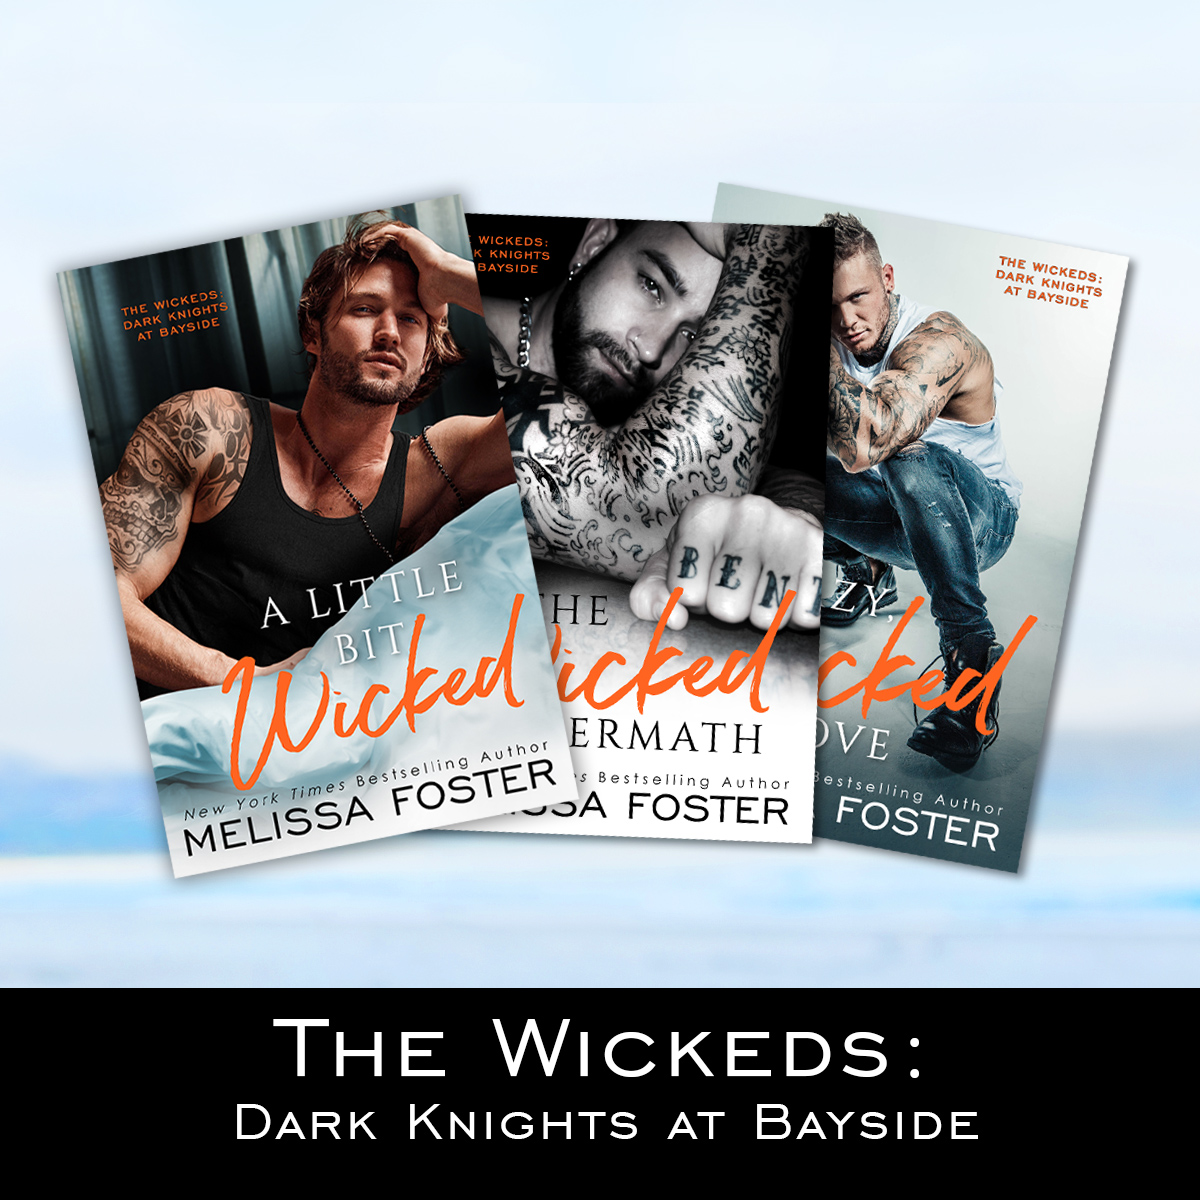 The Wickeds: Dark Knights at Bayside by Melissa Foster